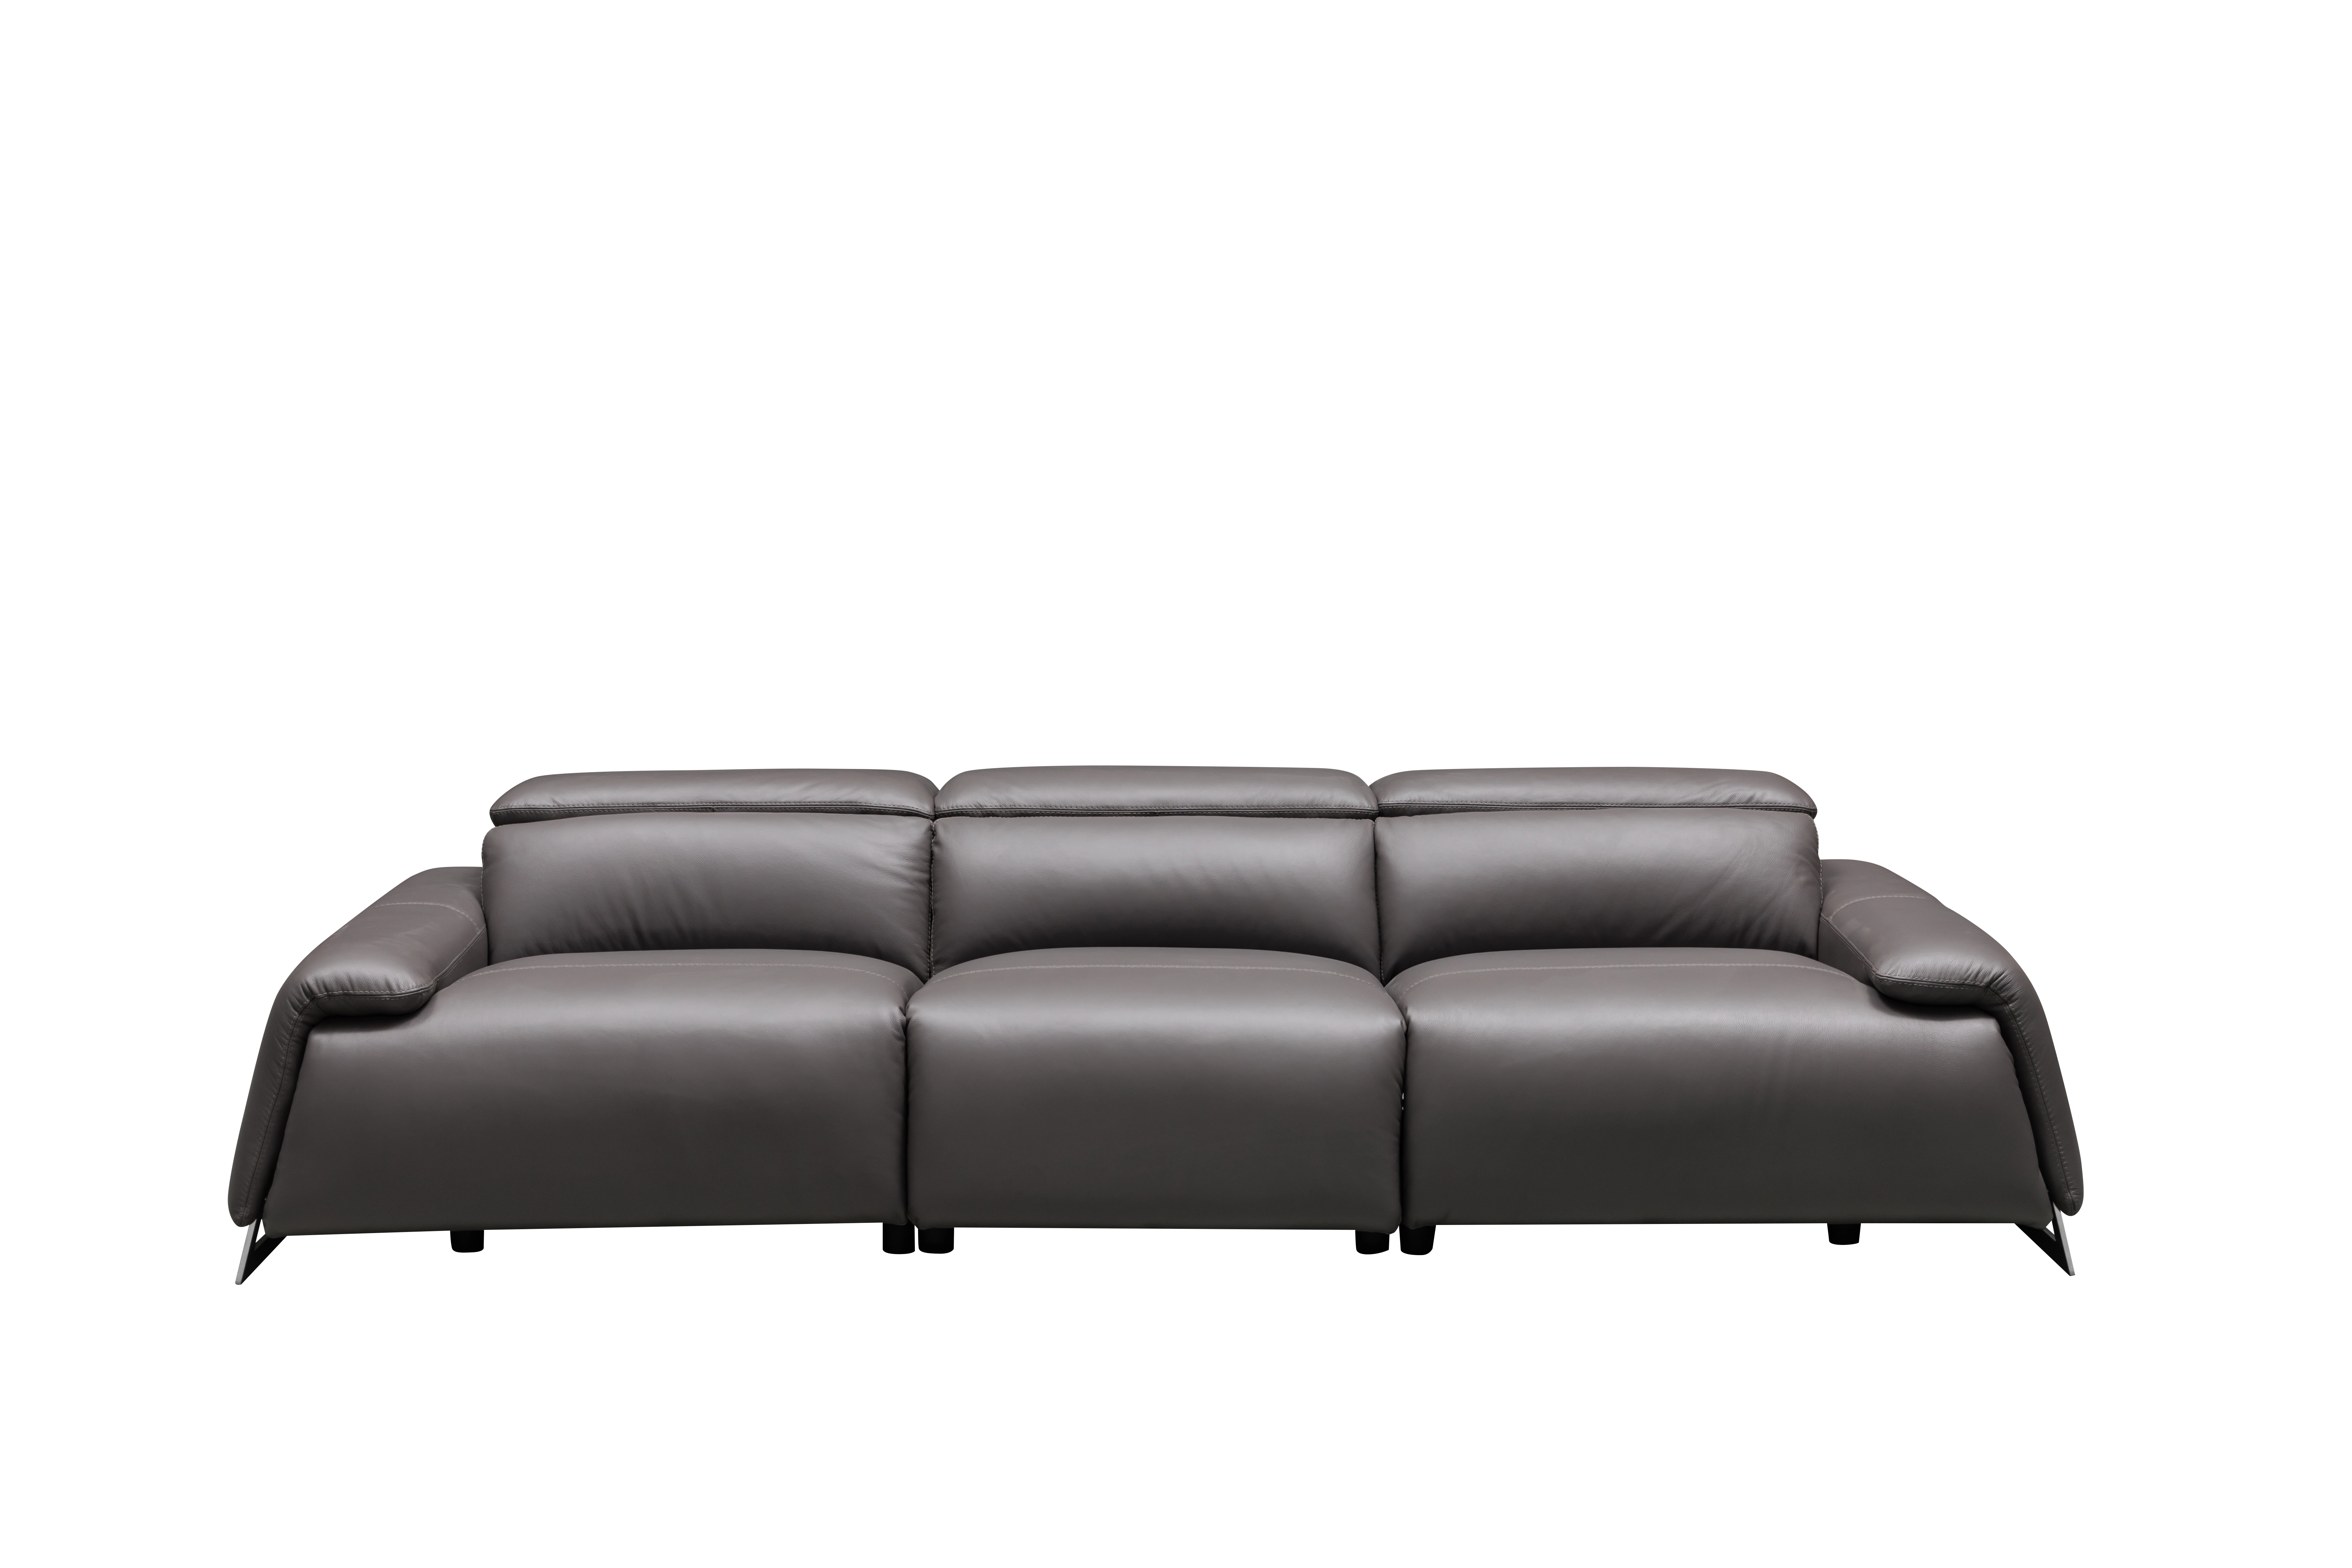 Canaletto 3 Seater Power Recliner Sofa